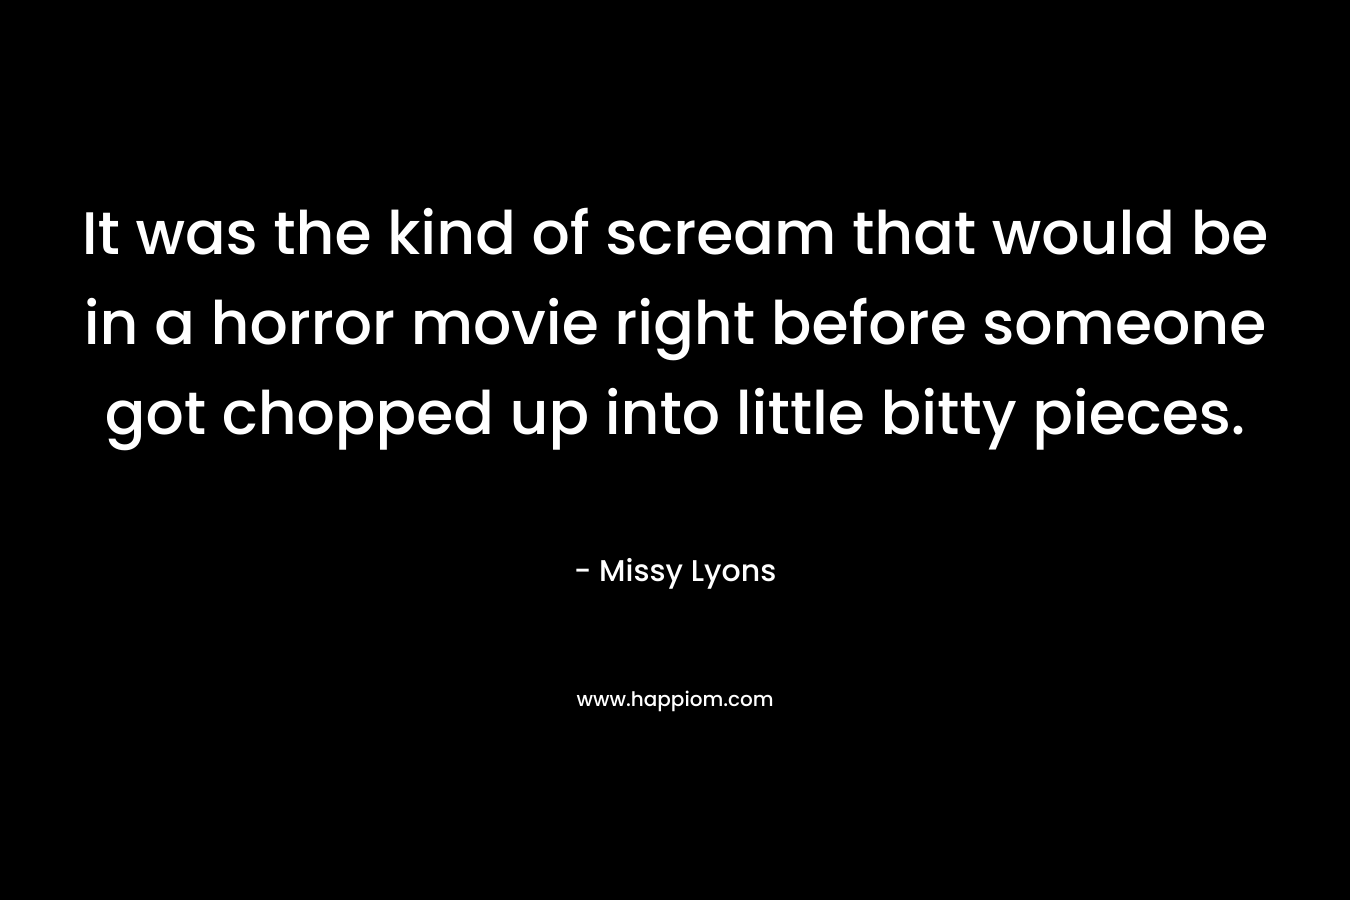 It was the kind of scream that would be in a horror movie right before someone got chopped up into little bitty pieces. – Missy Lyons